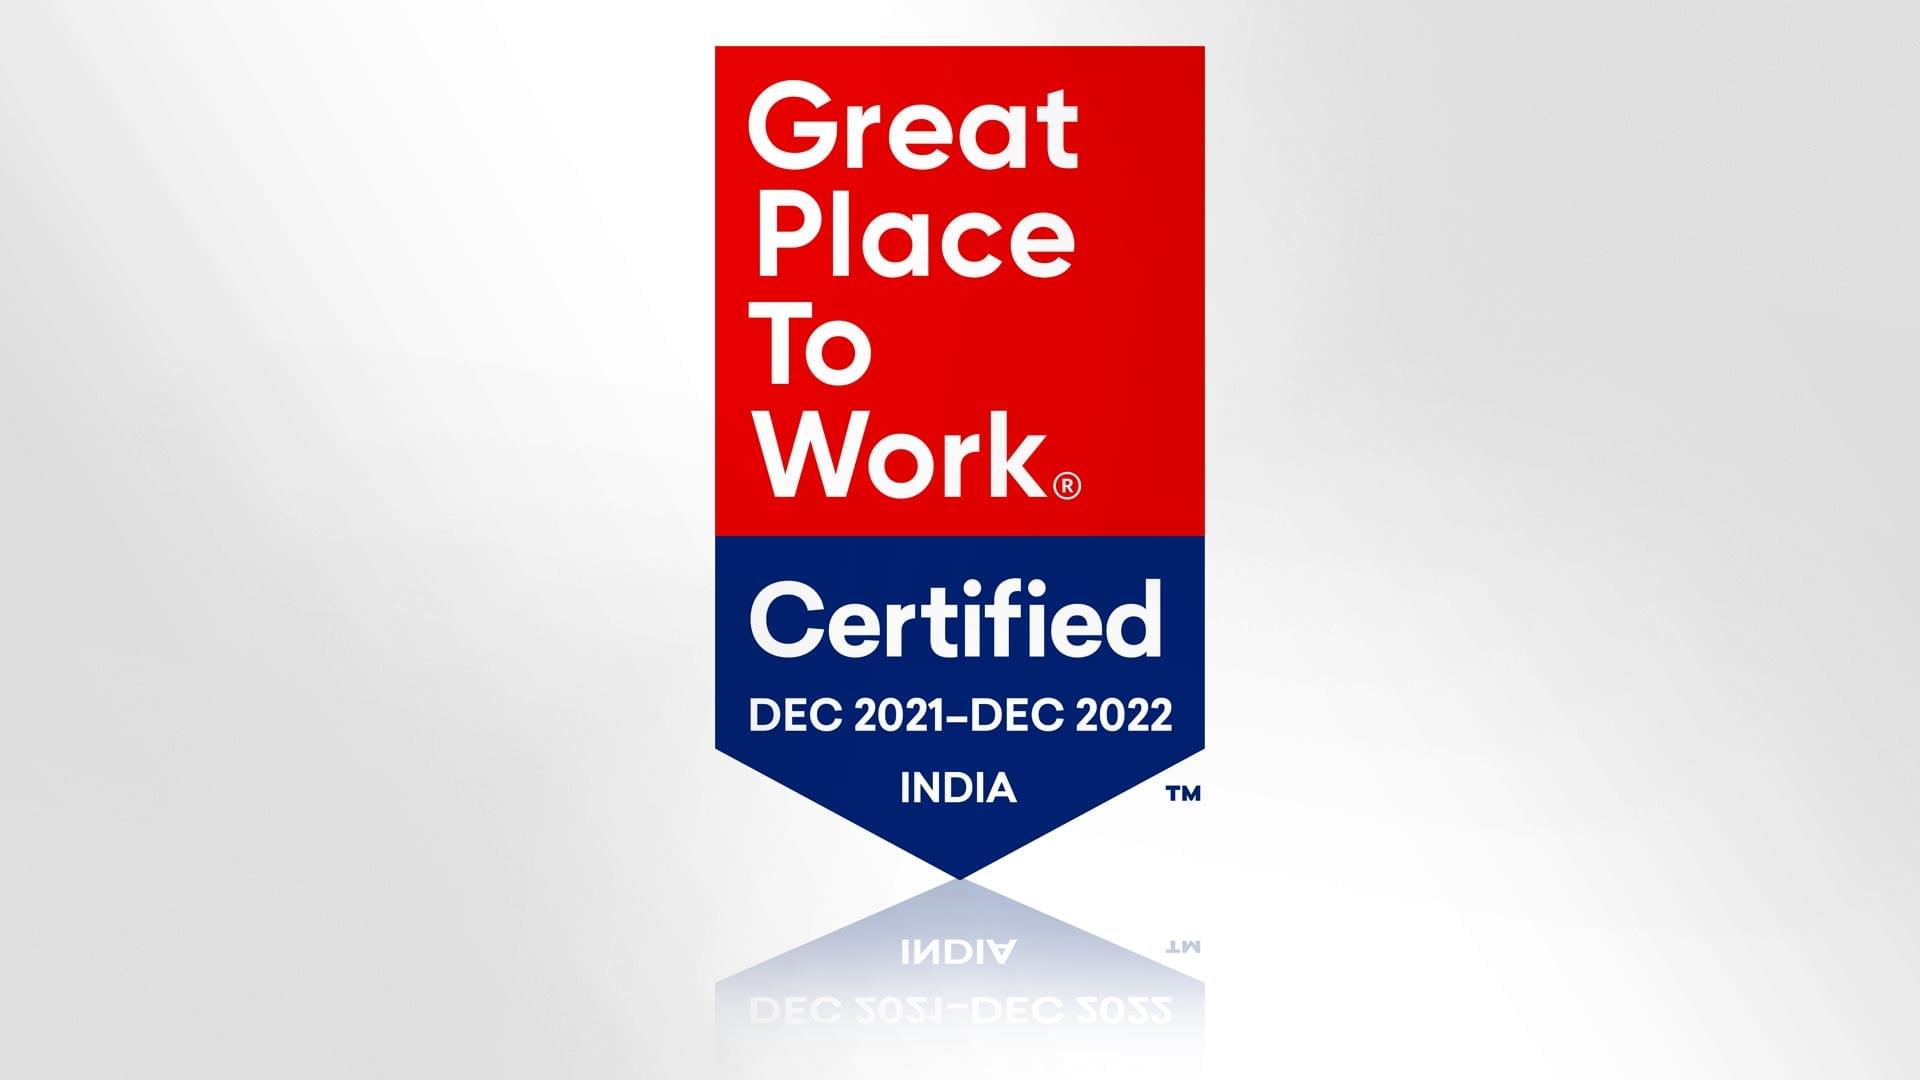 Certificate with the inscription "Great Place To Work" and the certification period December 2021 to December 2022.